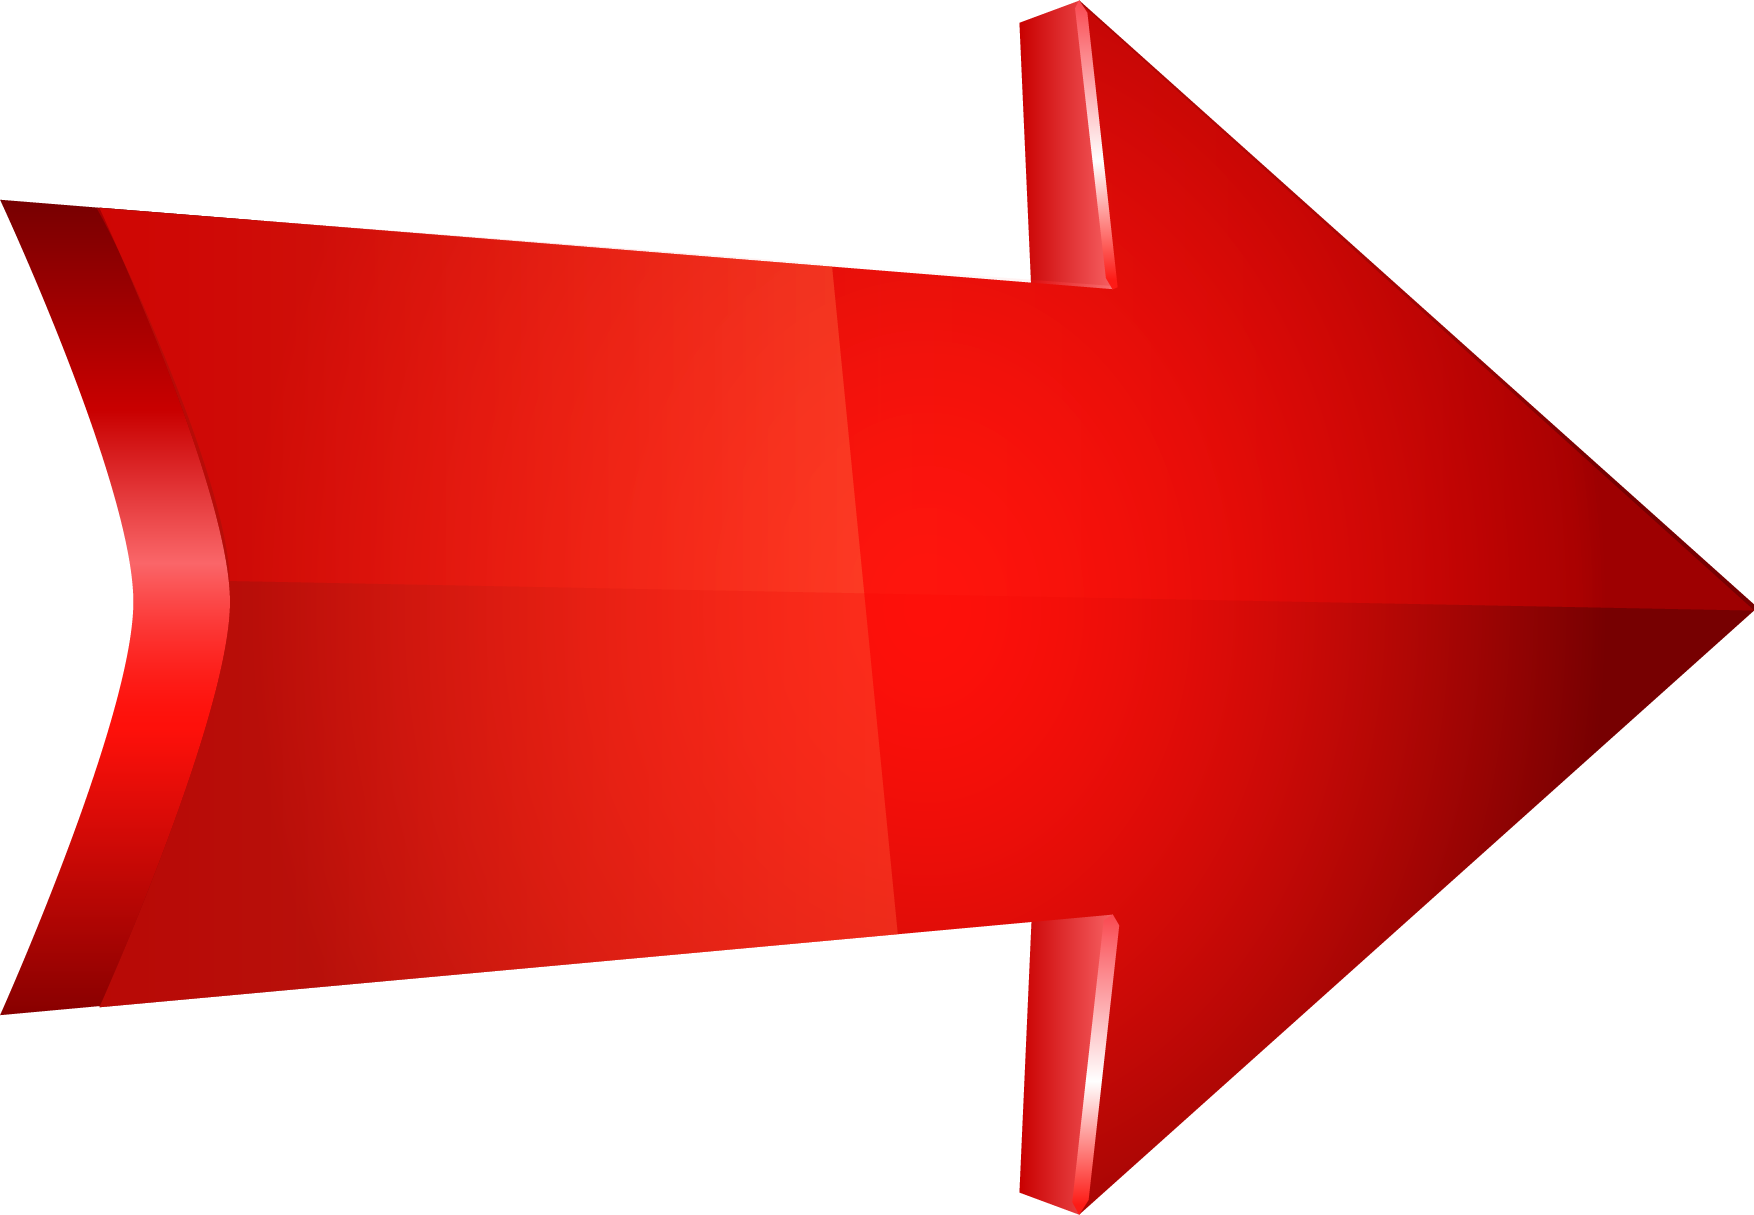 Brand Triangle Arrow Red HQ Image Free PNG PNG Image